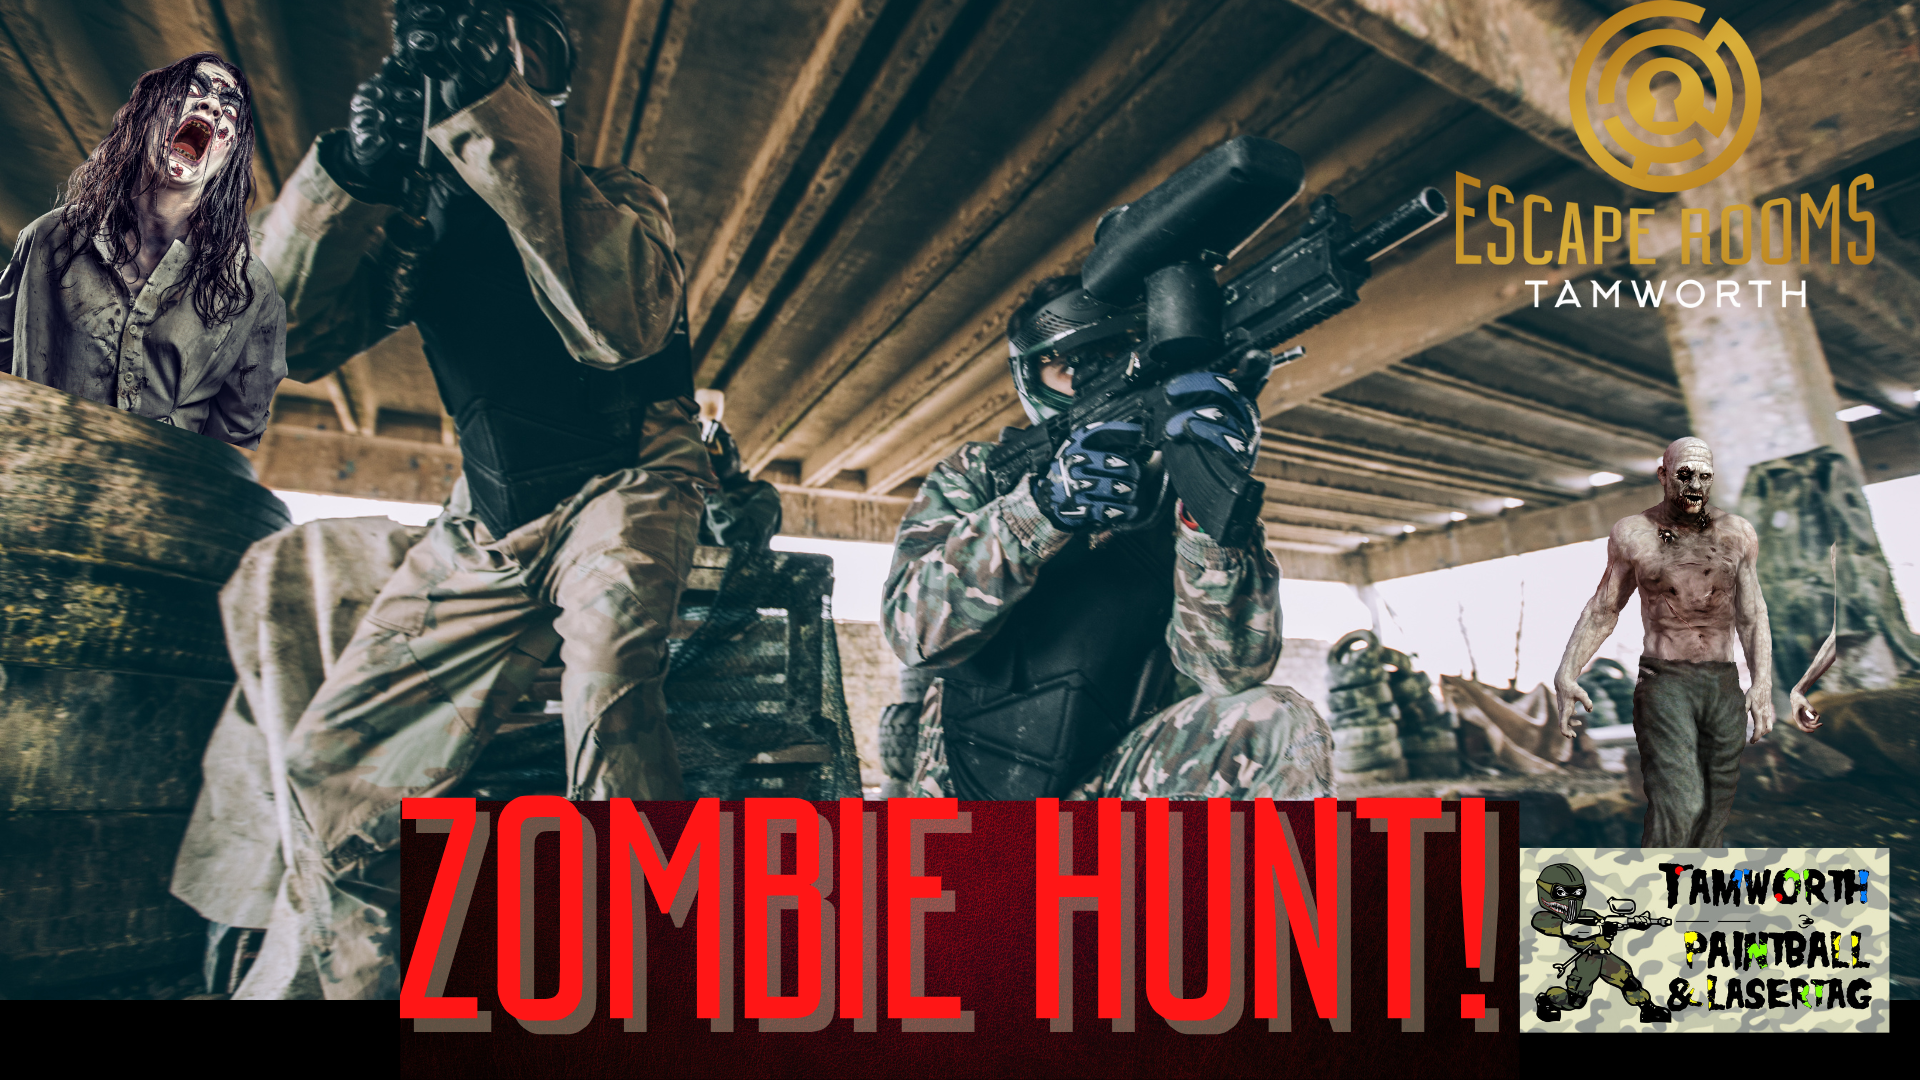 Zombie-hunt-Facebook-Event-Cover.png